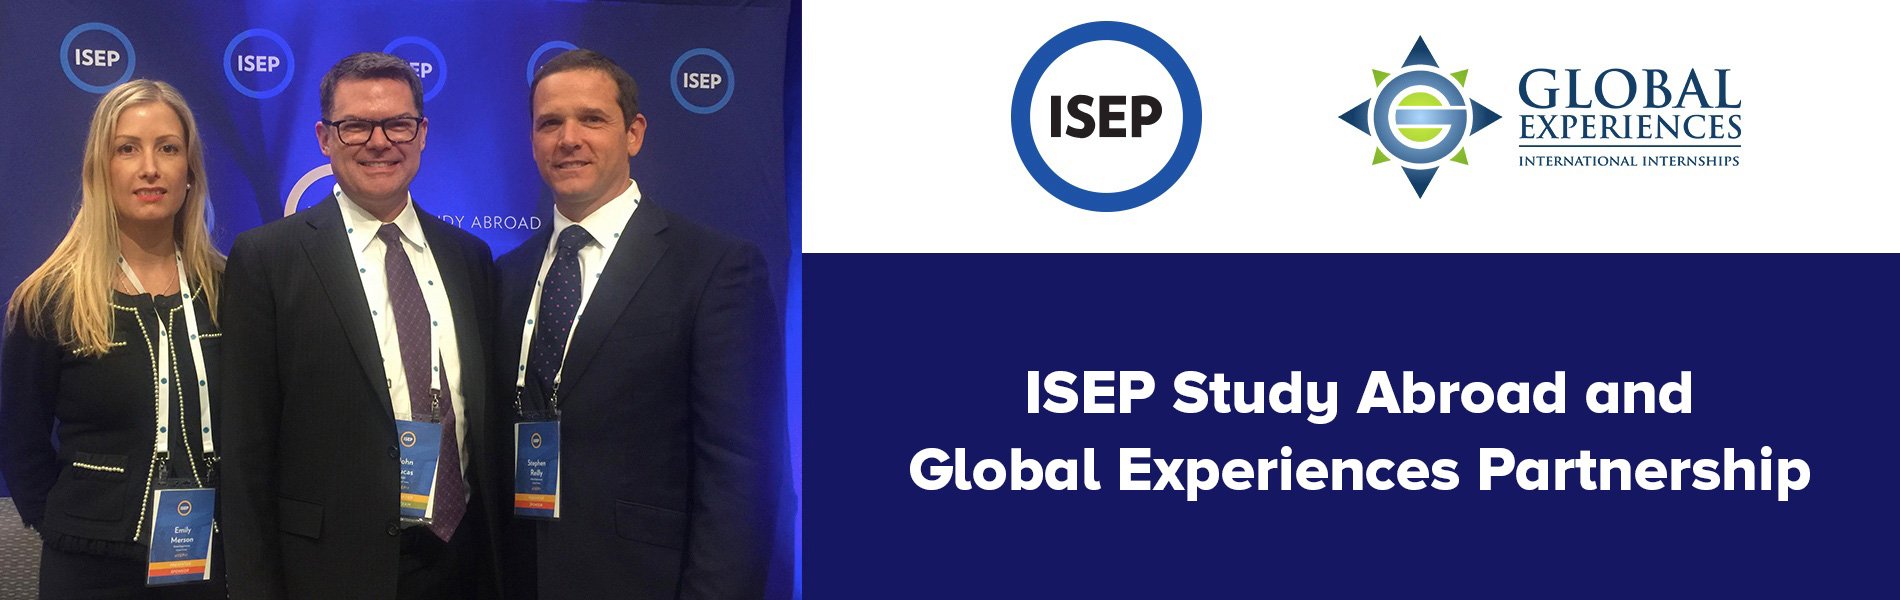 ISEP-and-Global-Experiences-Partnership